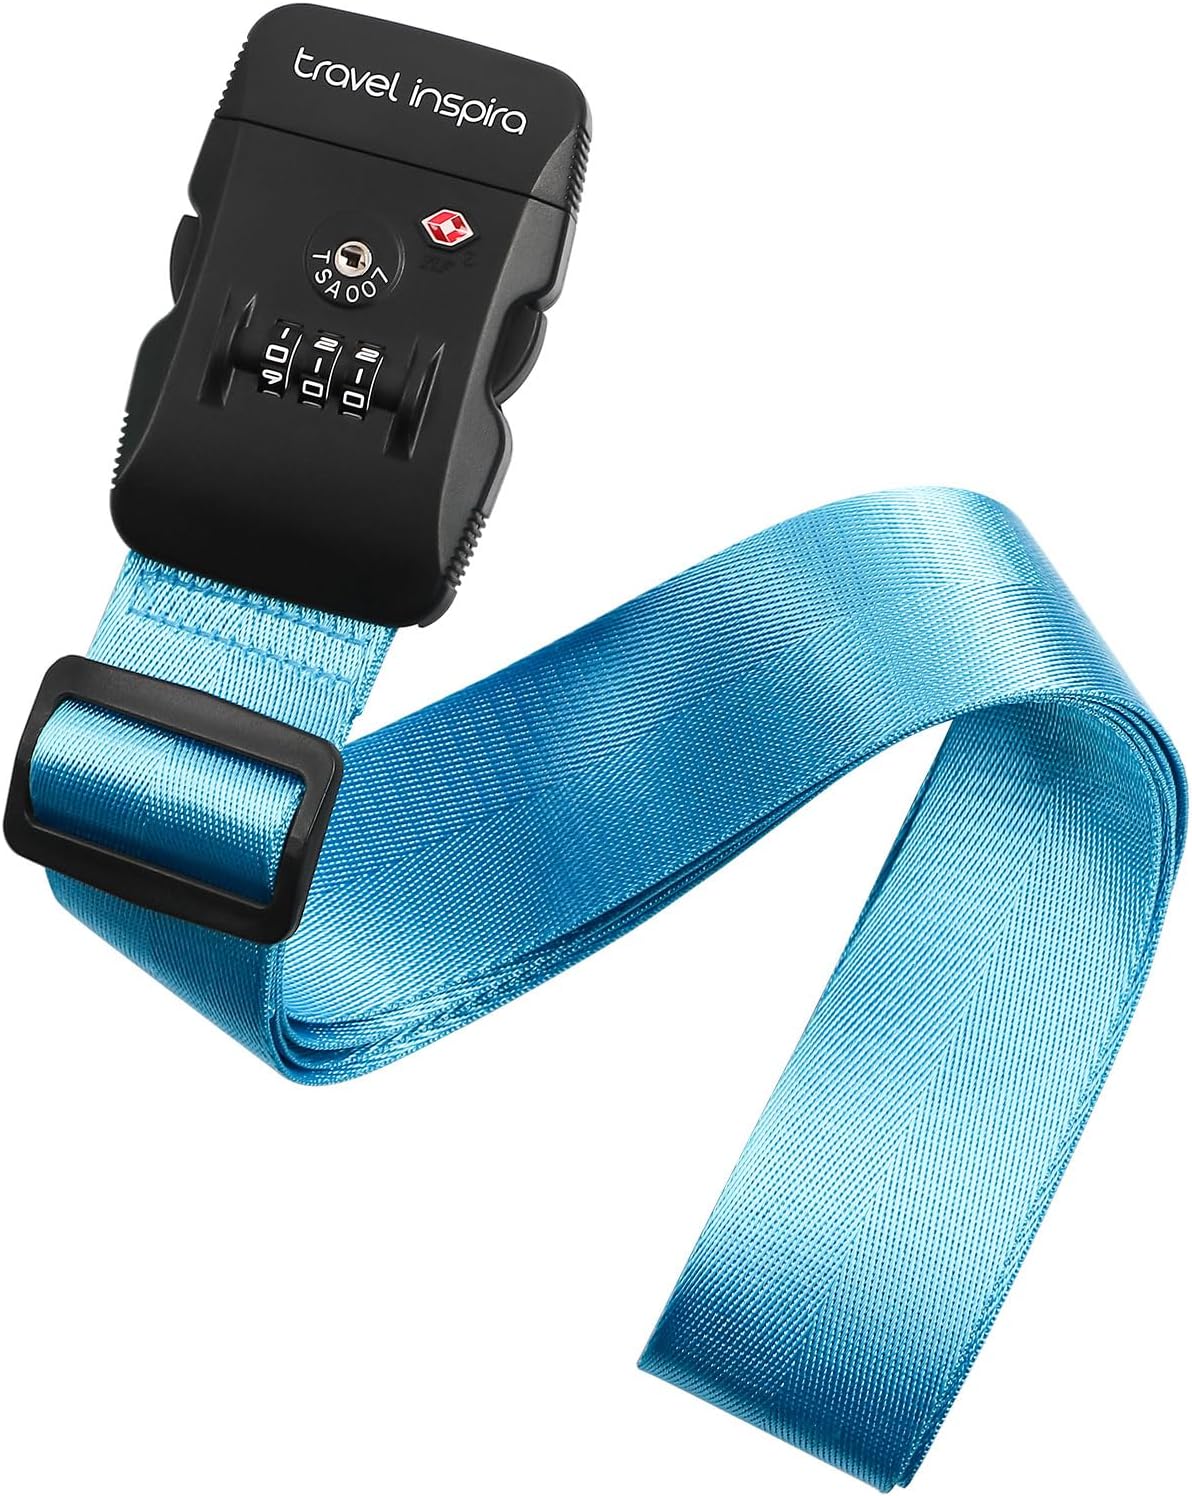 Travel Inspira Luggage Straps with TSA Combination Lock - Adjustable, Easy to Use, Protect Your Luggage, Blue